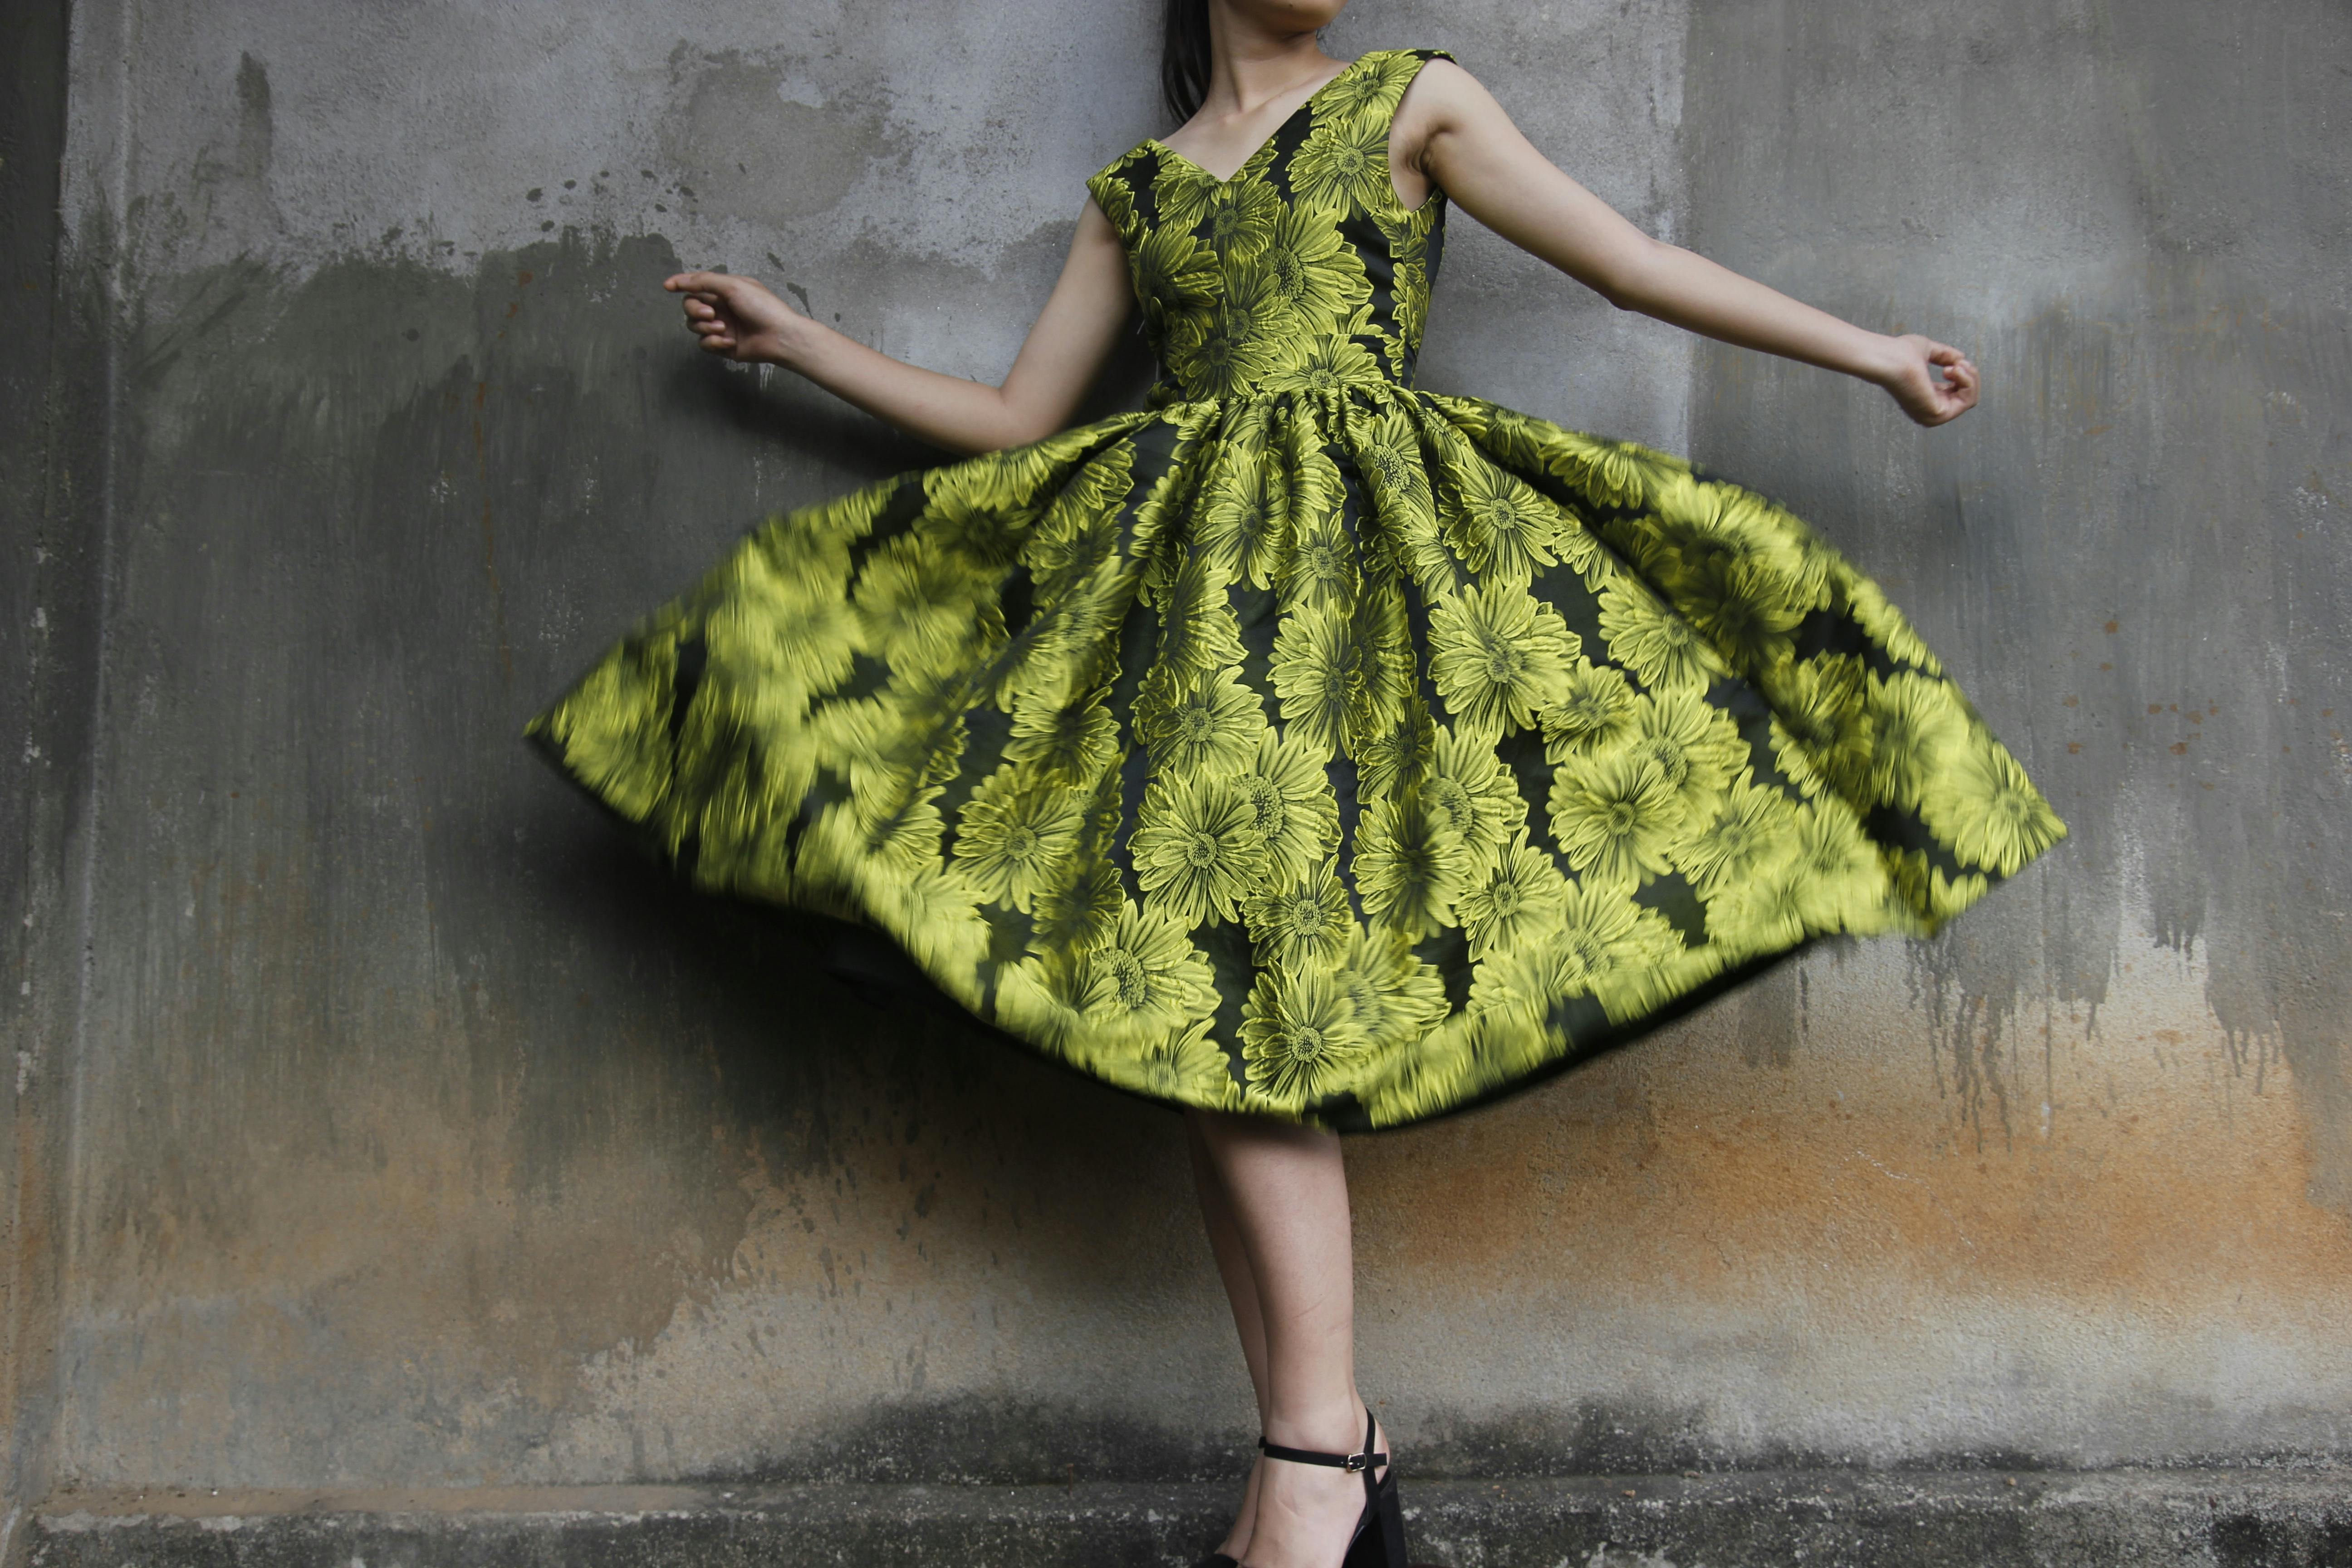 Dress Photos, Download The BEST Free Dress Stock Photos & HD Images